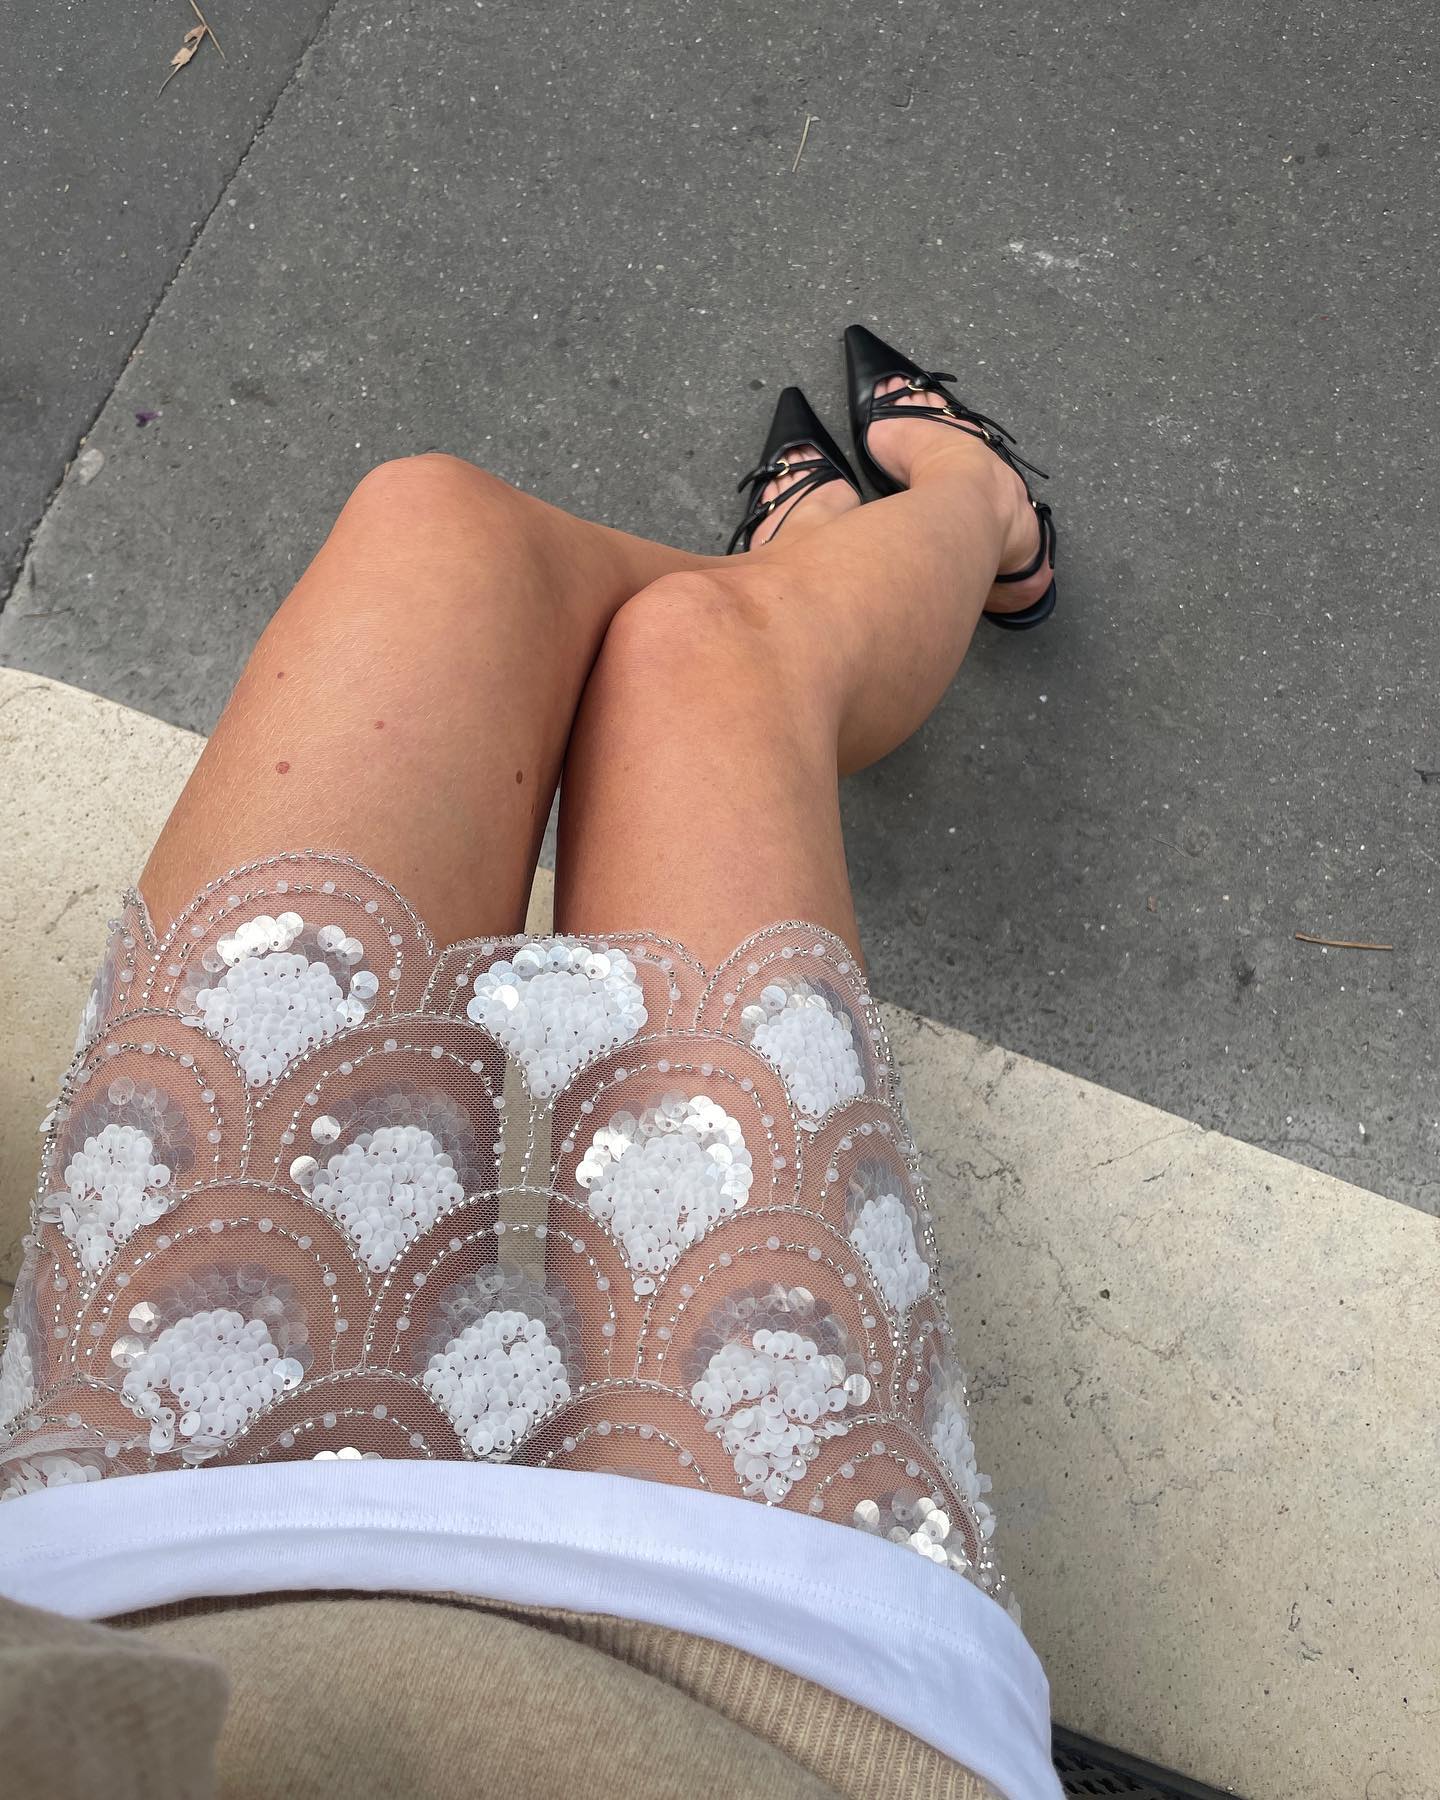 Jeanette Madsen sits and poses in an embellished sheer skirt